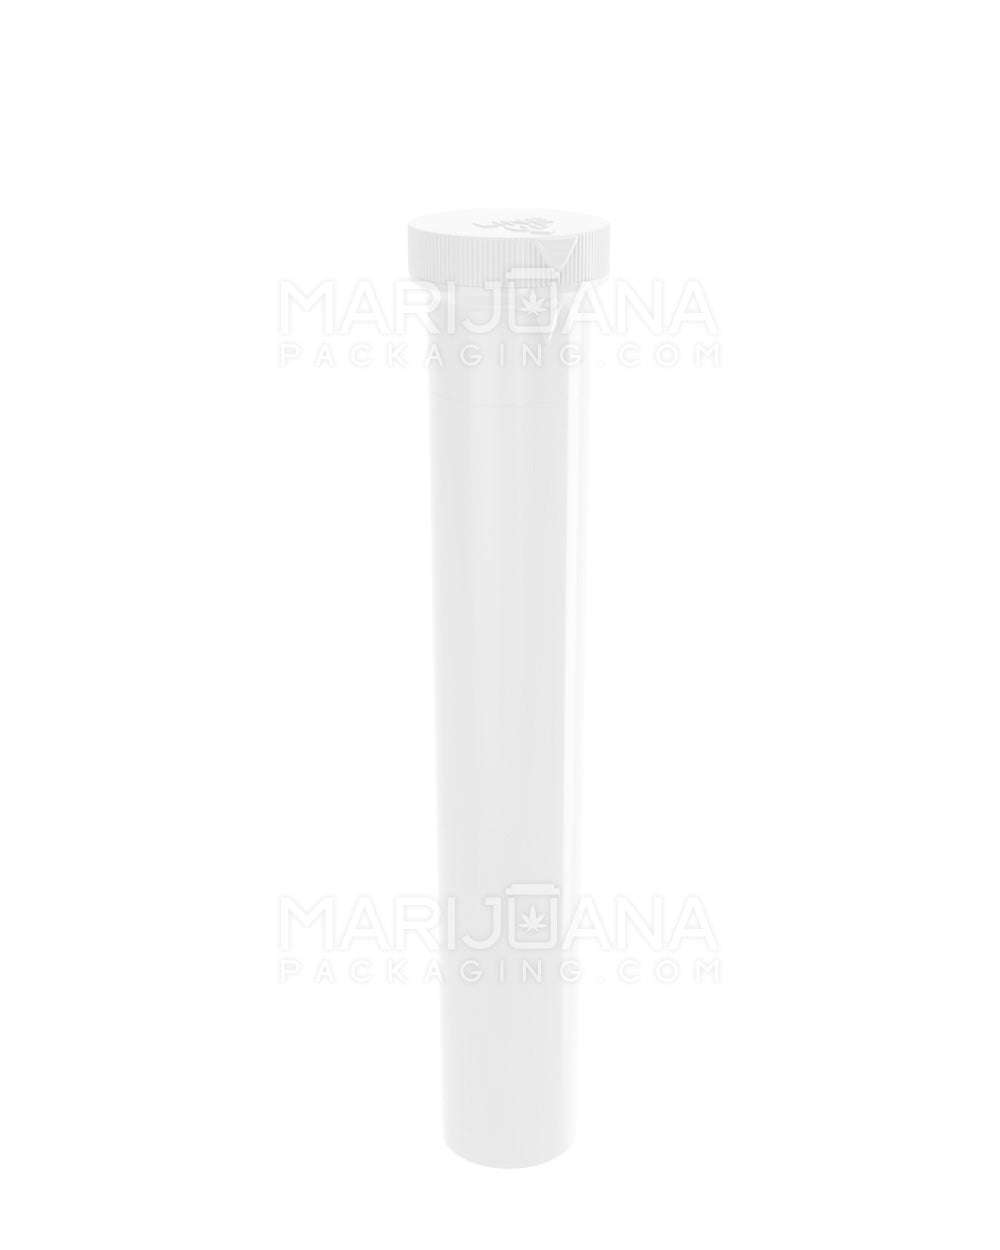 Child Resistant | King Size ‘Line-Up Arrow’ Pre-Roll Tubes | 116mm - Opaque White Plastic - 500 Count - 1